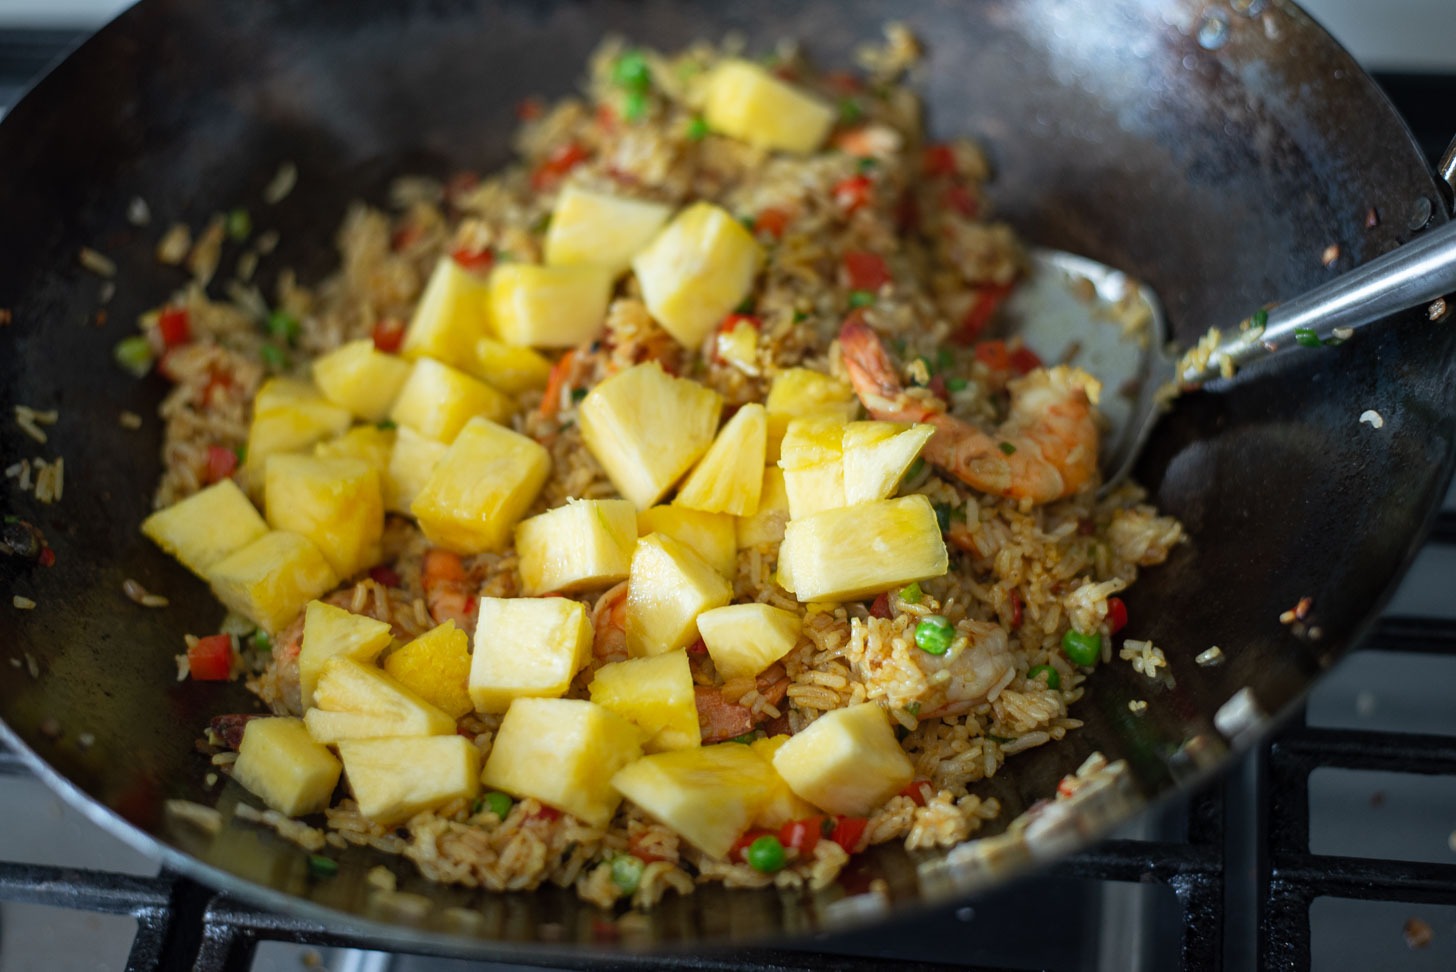 Pineapple chunks are added to the fried rice mixture to finish off.